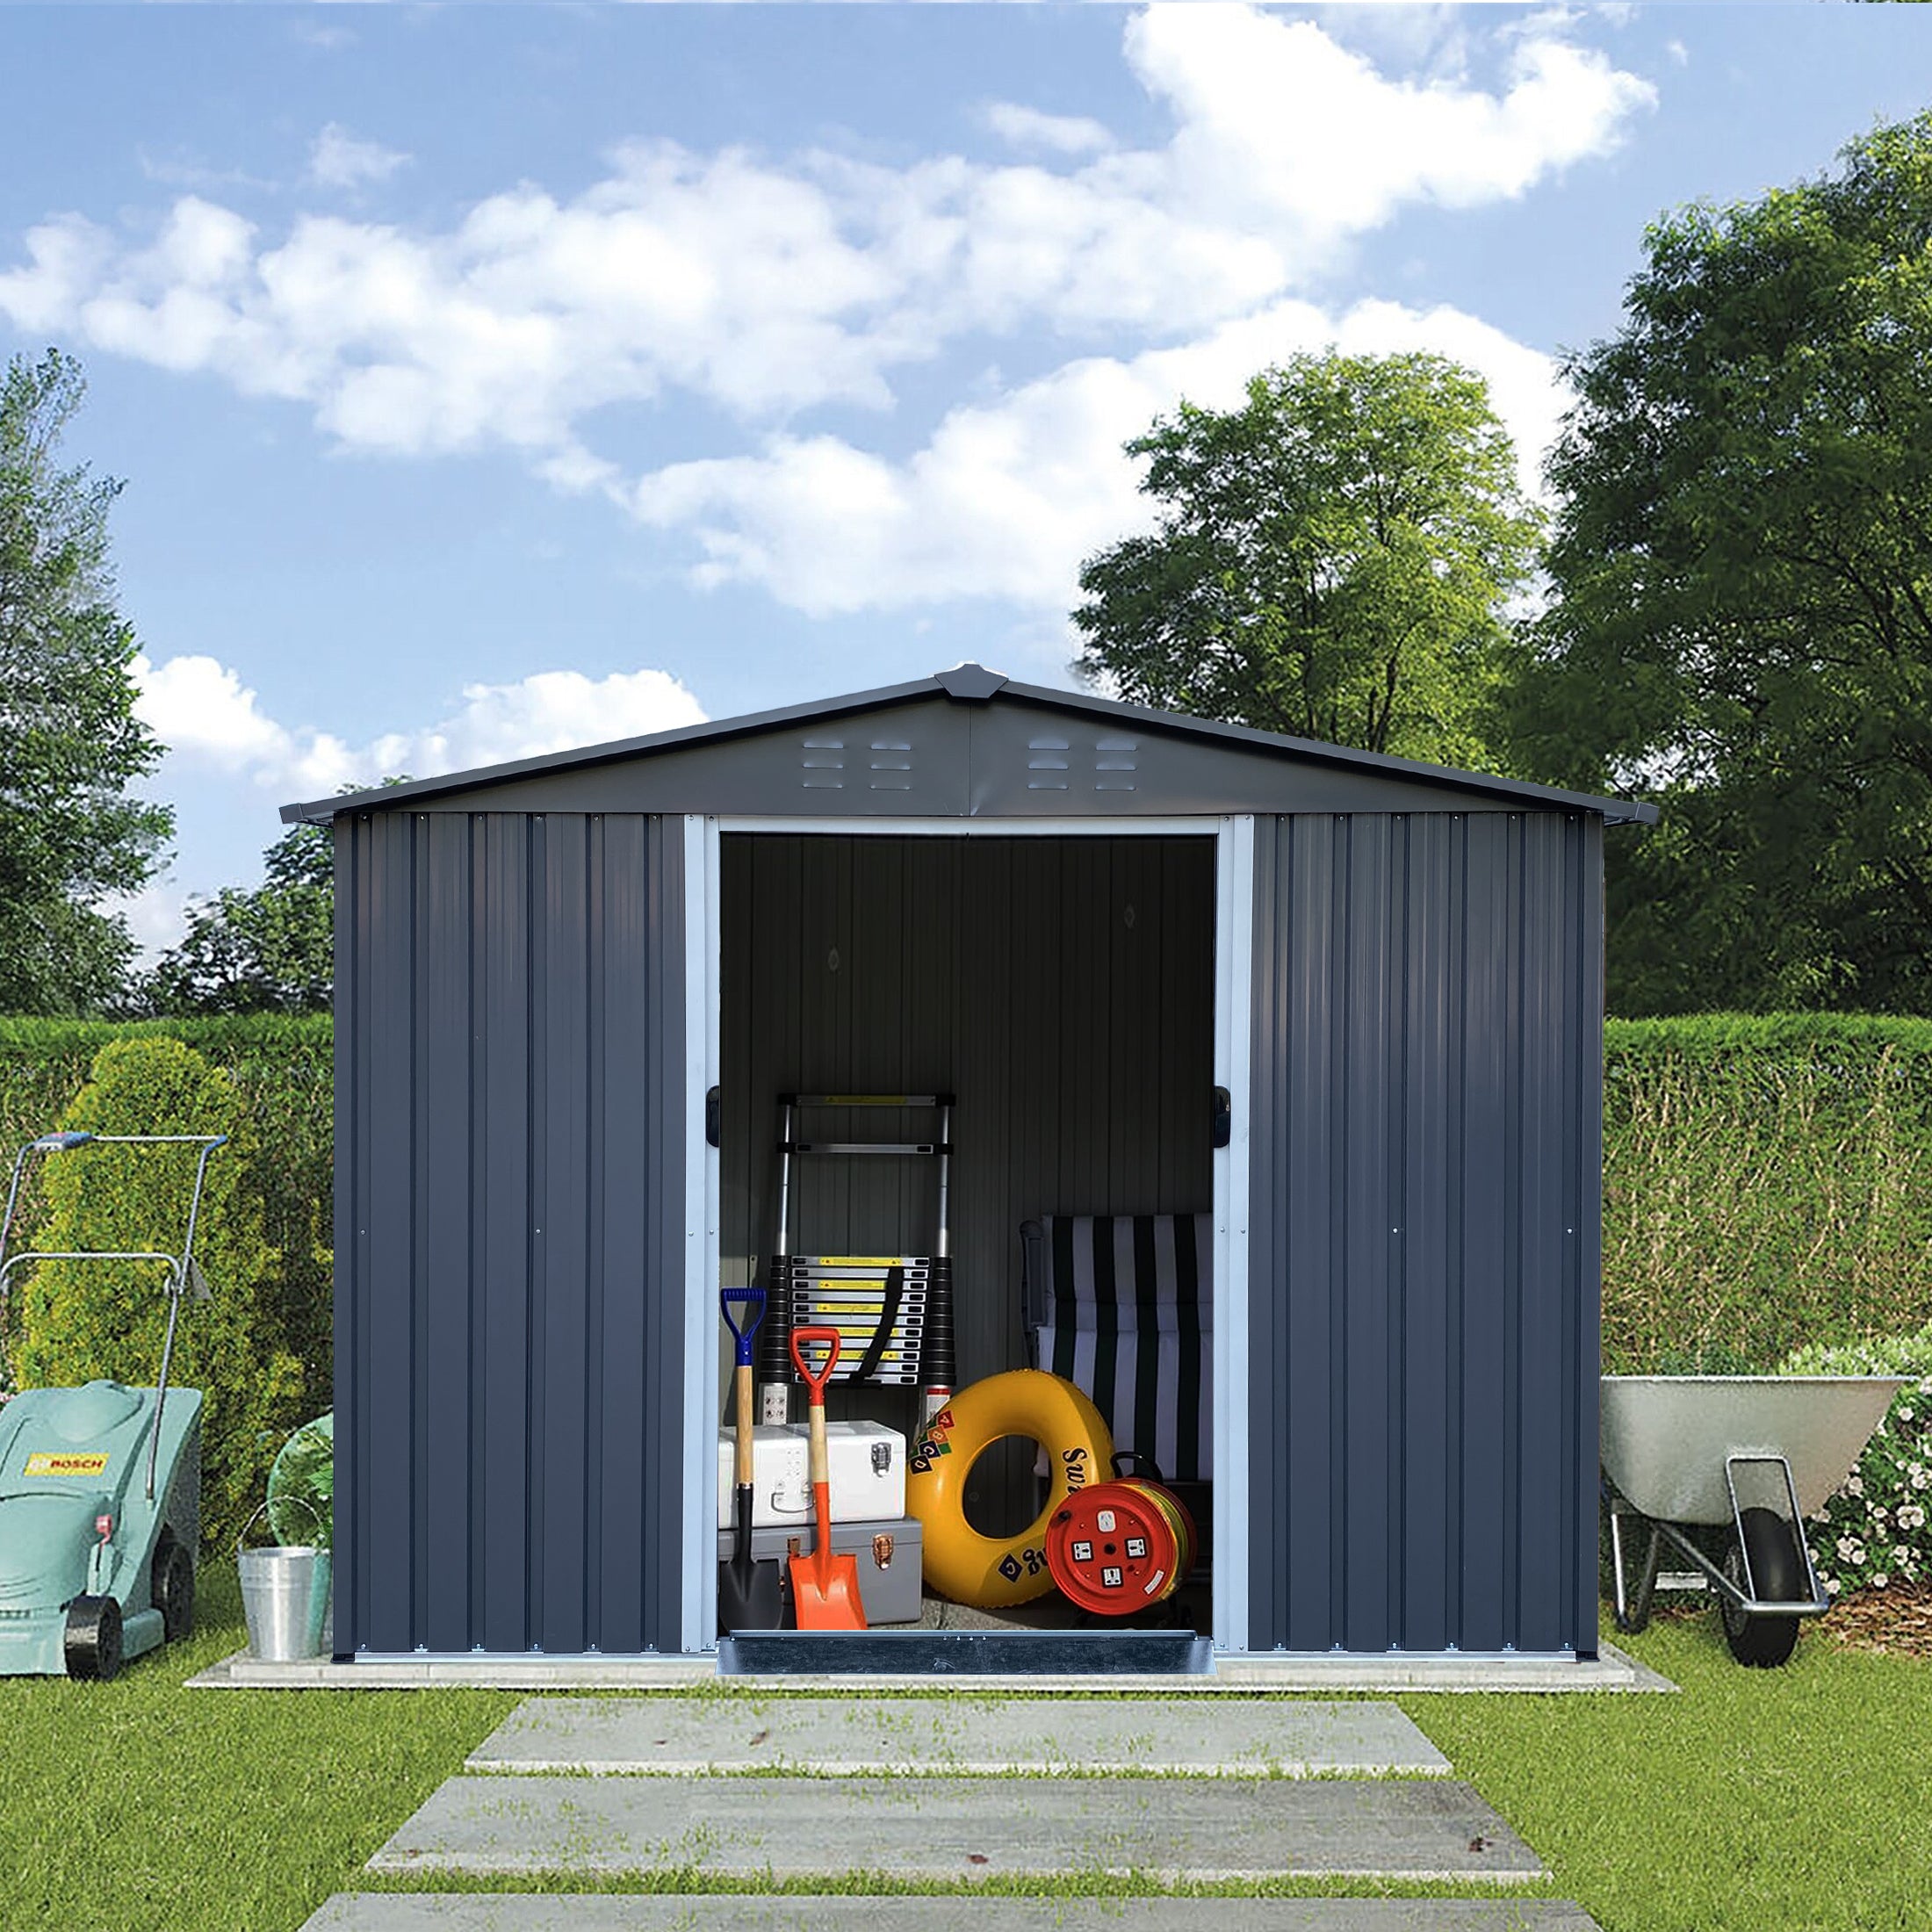 Adventure Cache 8 x 6 FT Large Metal Tool Sheds, Heavy Duty Storage House with Lockable Sliding Doors with Air Vent for Backyard Patio Lawn to Store Bikes, Tools, Lawnmowers Dark Grey